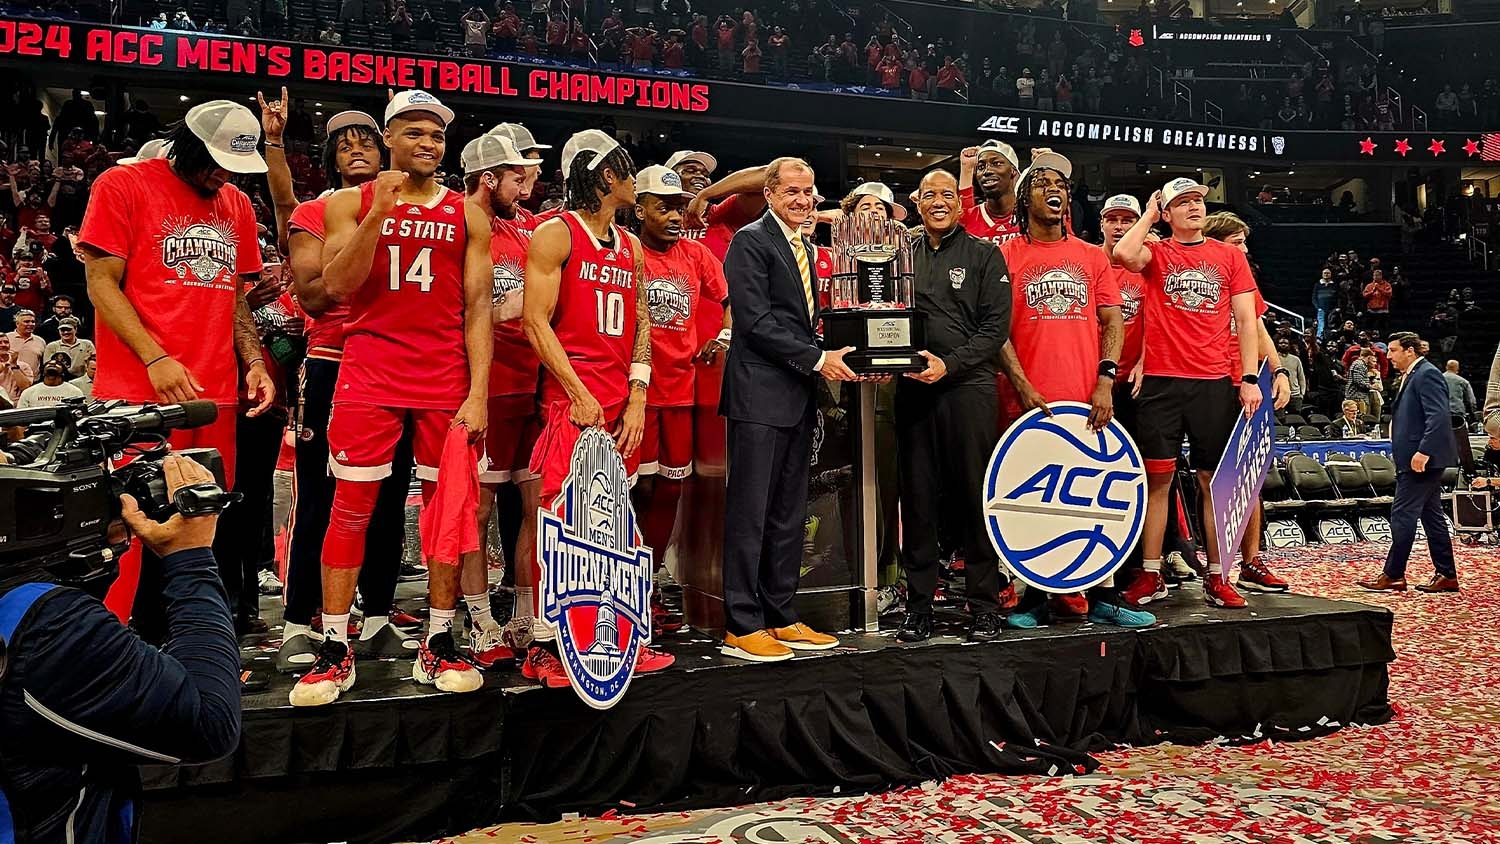 NC State's men's basketball team earns its ACC Championship trophy on stage after the game